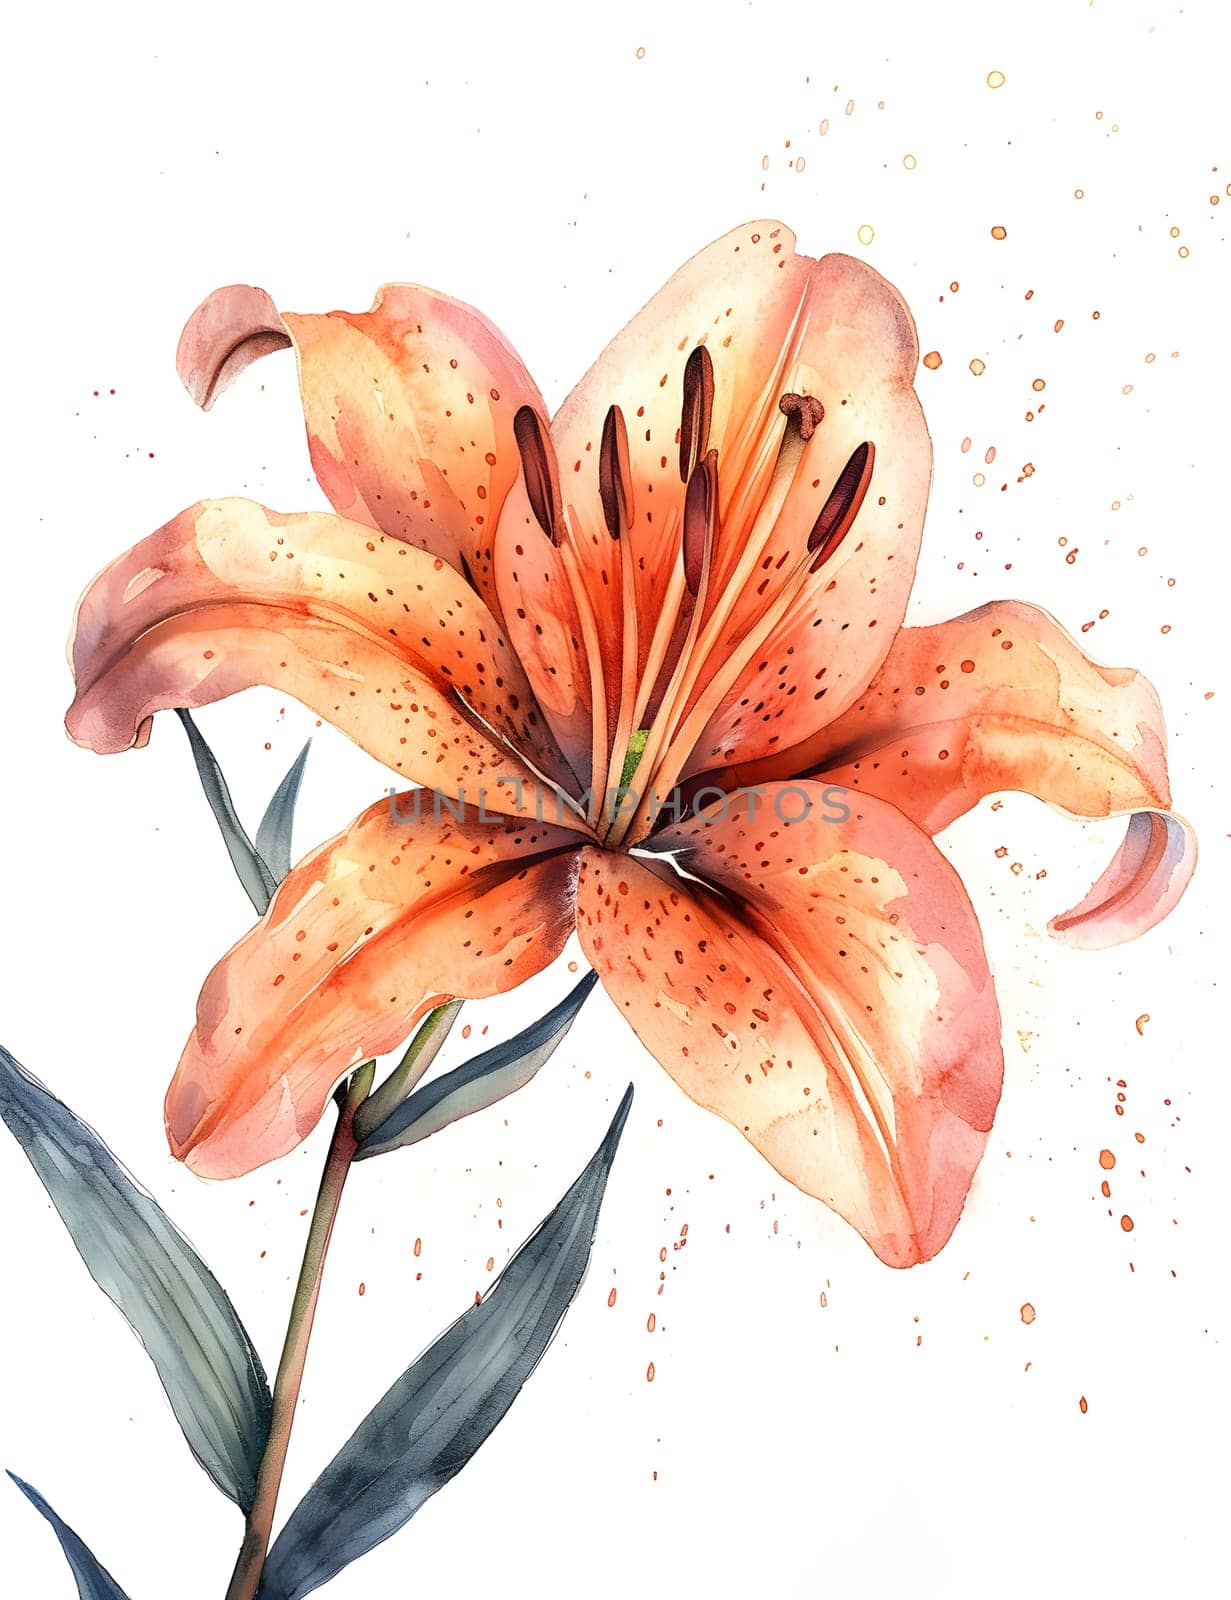 Watercolor painting of an orange lily with green leaves on white background by Nadtochiy